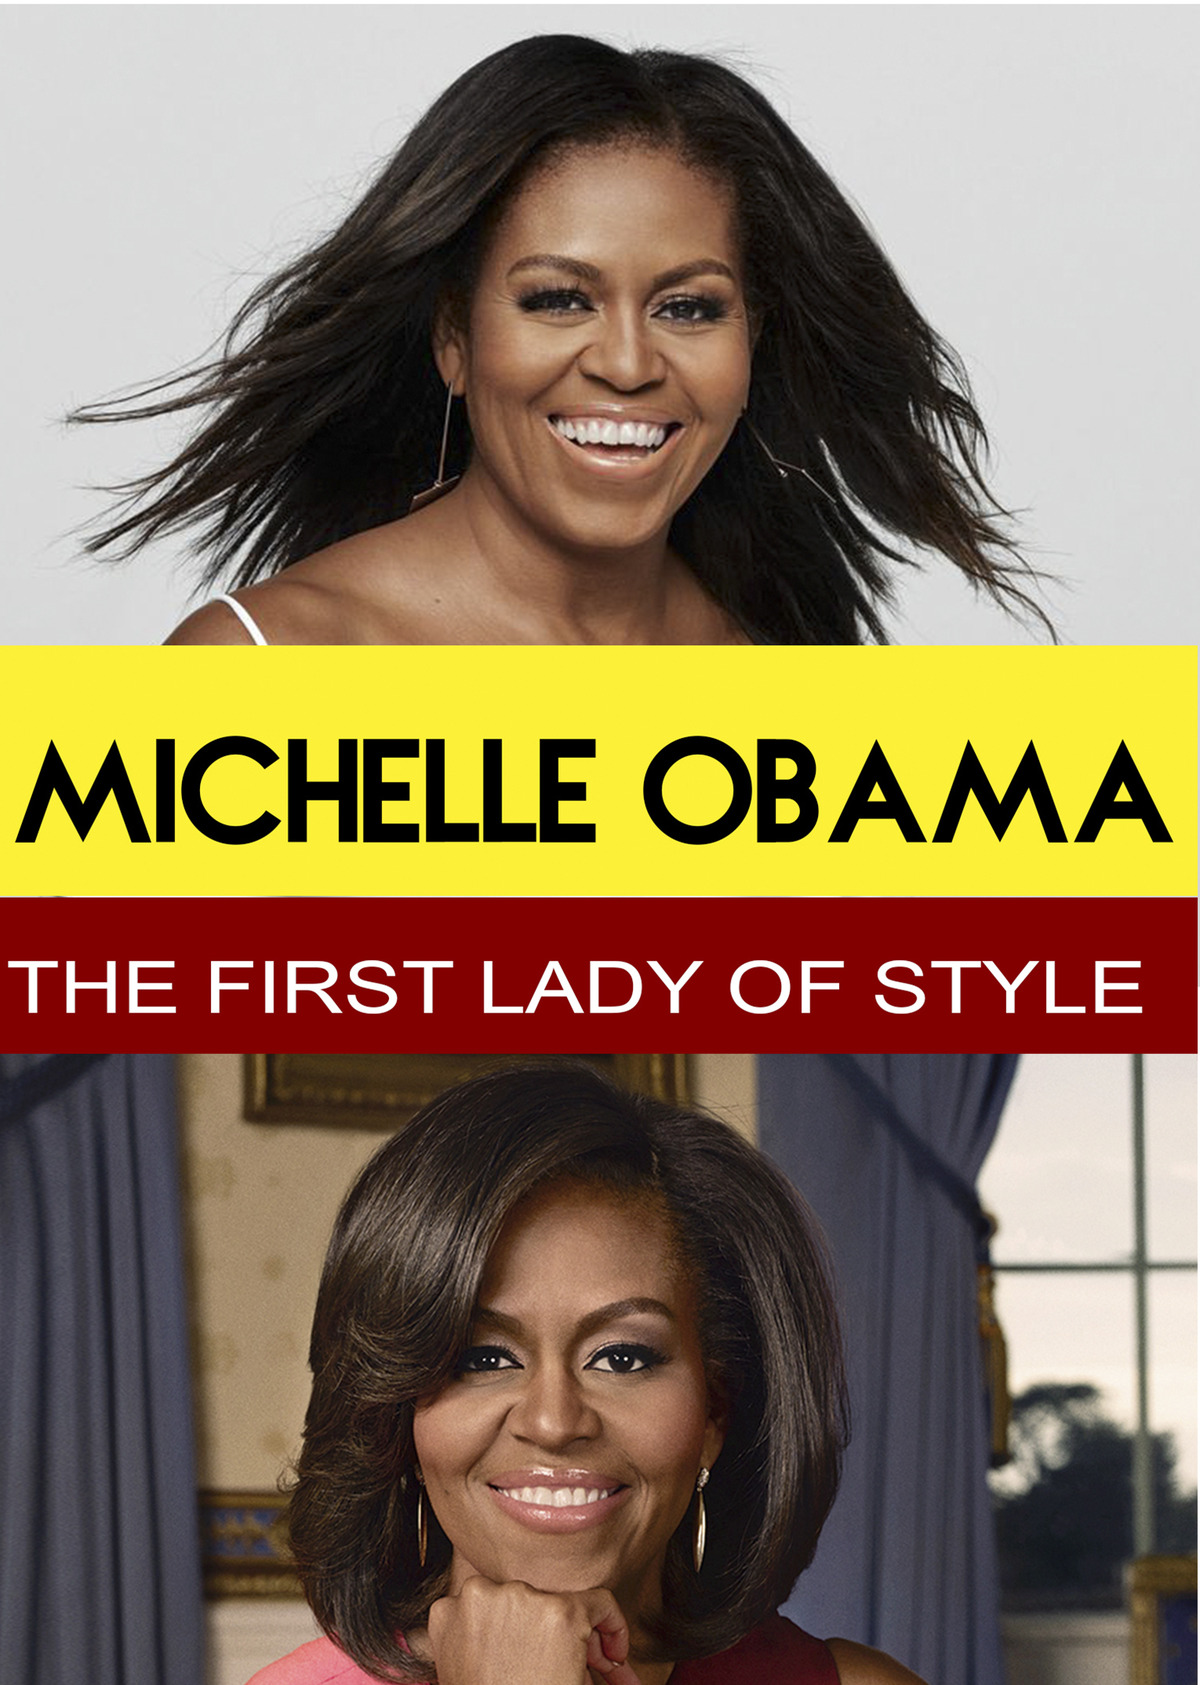 L7817 - Michelle Obama - The First Lady of Style